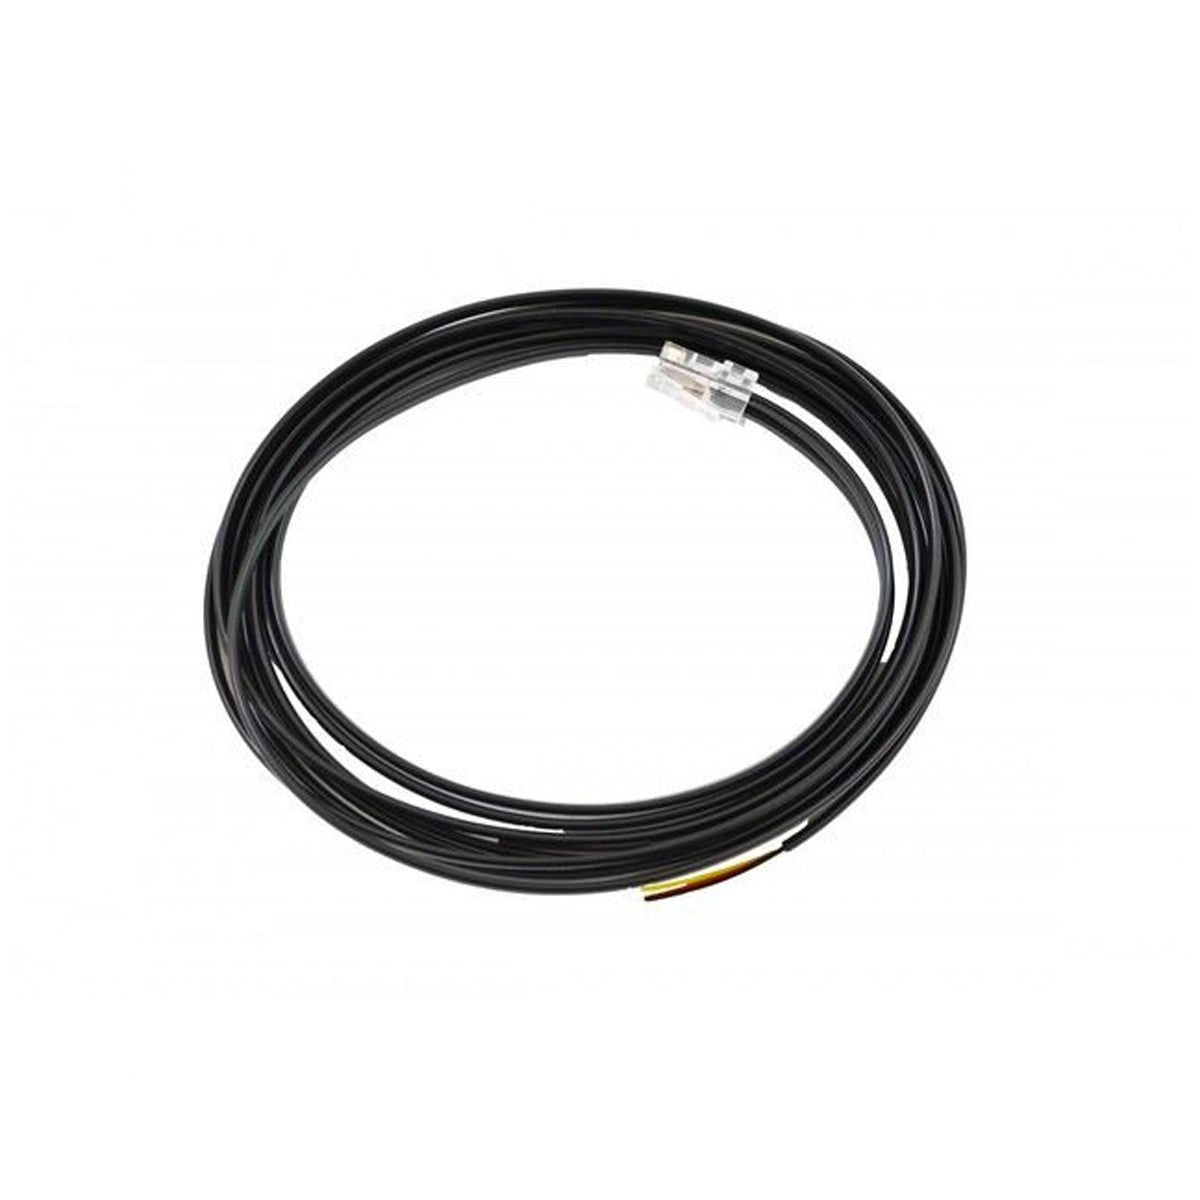 Neptune Systems 2 Channel Apex to Light Dimming Cable - Charterhouse Aquatics